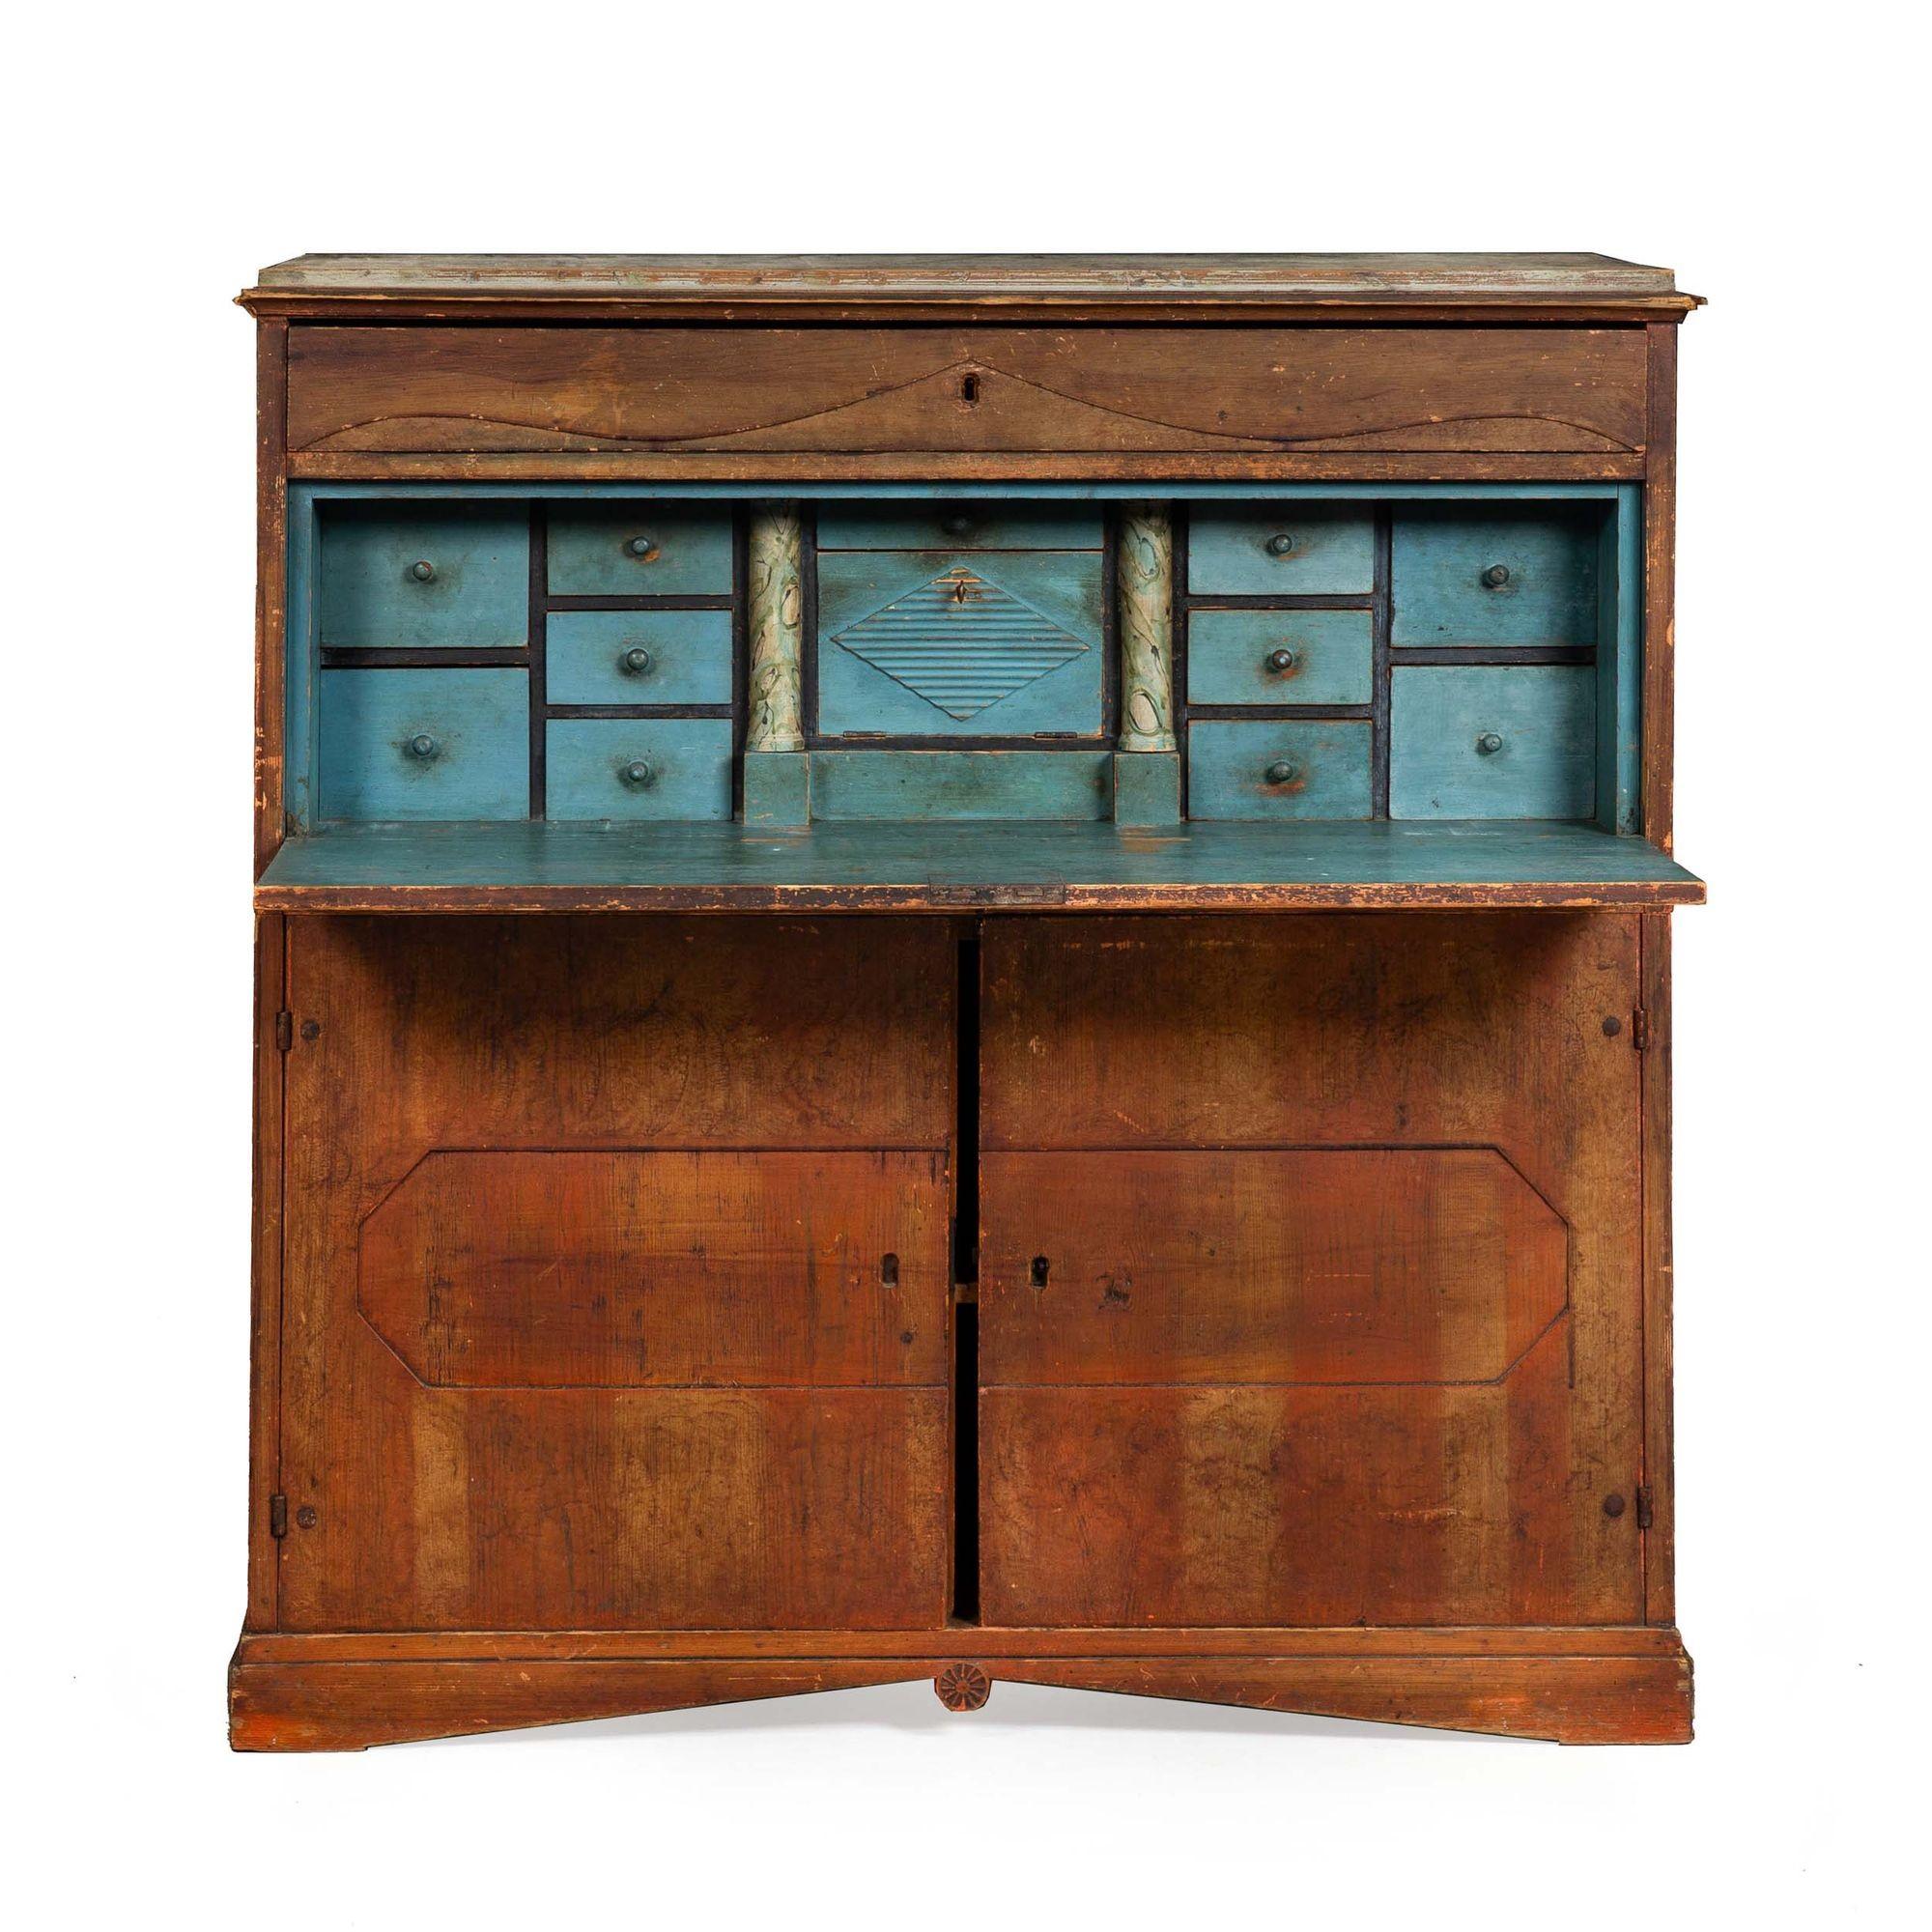 FINE GUSTAVIAN SECRETARY DESK OVER CABINET IN EARLY RUST AND BLUE PAINT
Probably Swedish or Danish, circa first half of the 19th century
Item # 403BAS18Q

An very cool and quite rare Gustavian writing desk executed in pine with a very early painted